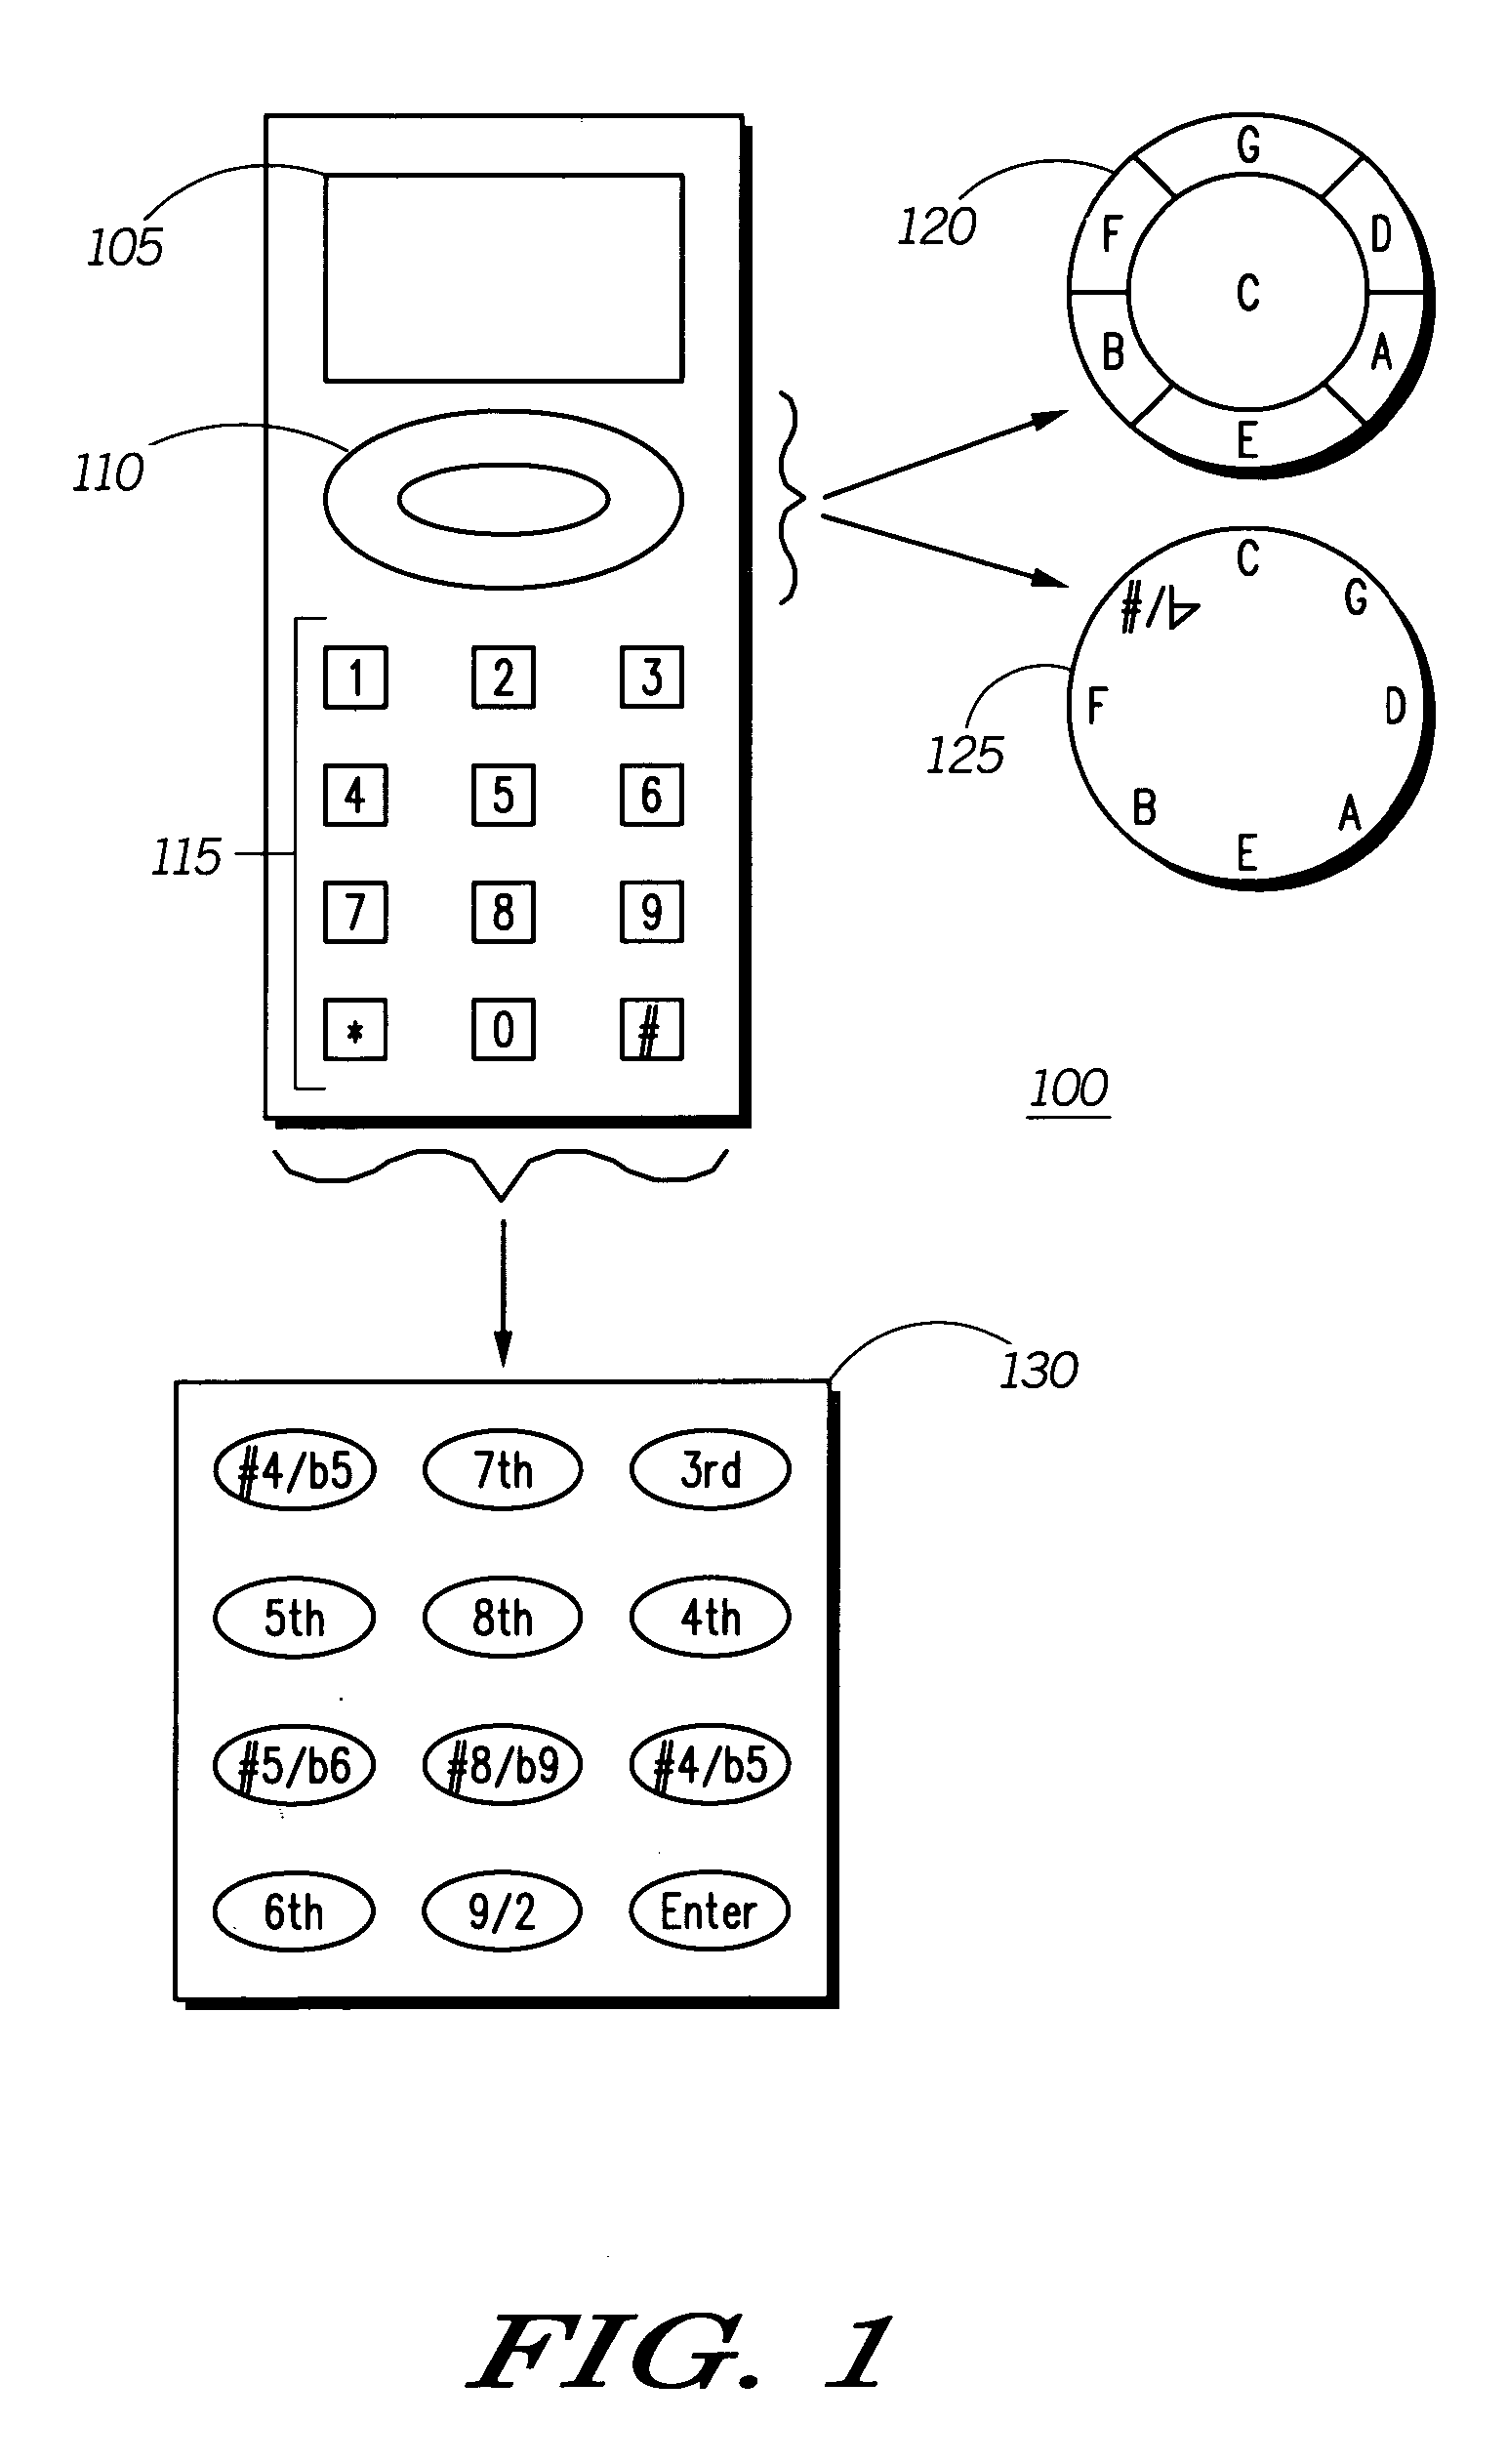 Entry of musical data in a mobile communication device